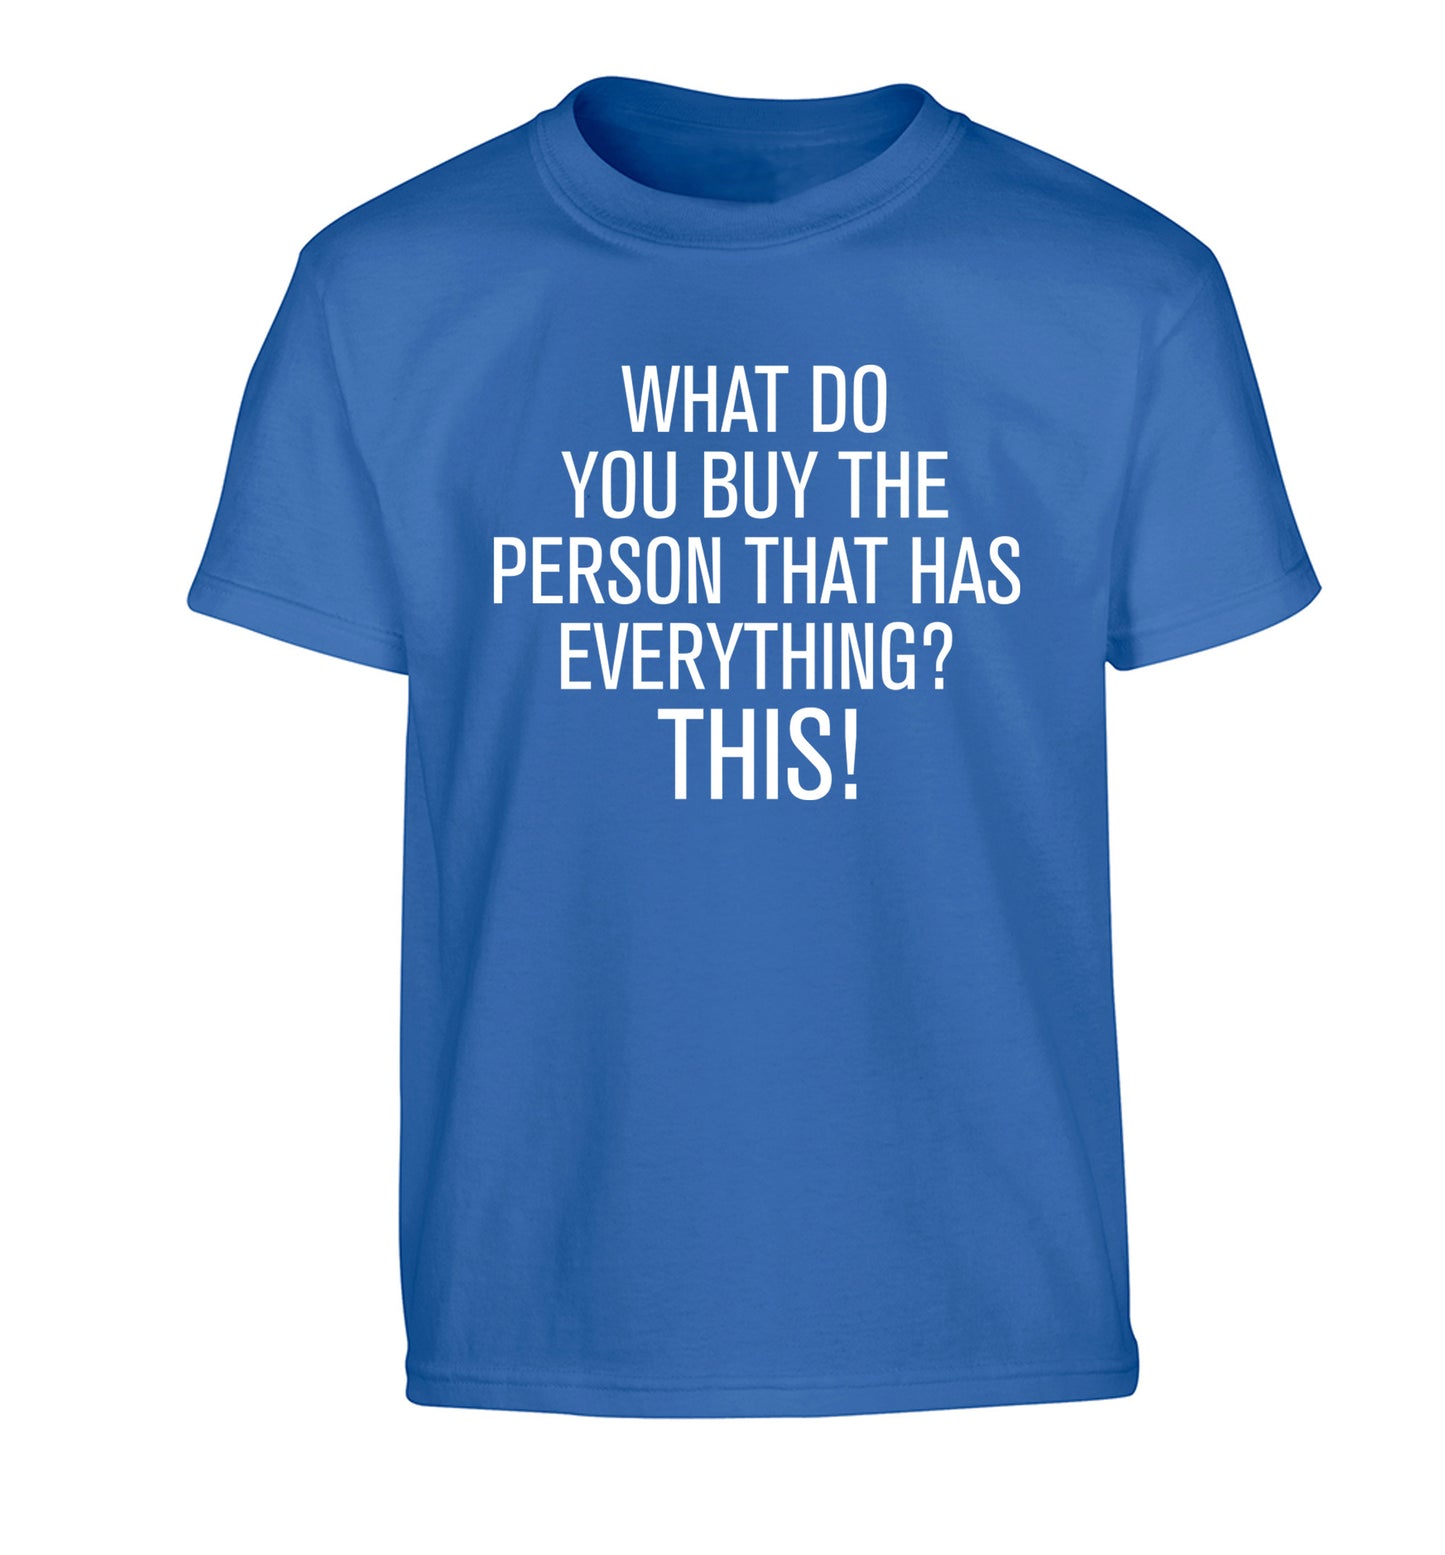 What do you buy the person that has everything? This! Children's blue Tshirt 12-13 Years